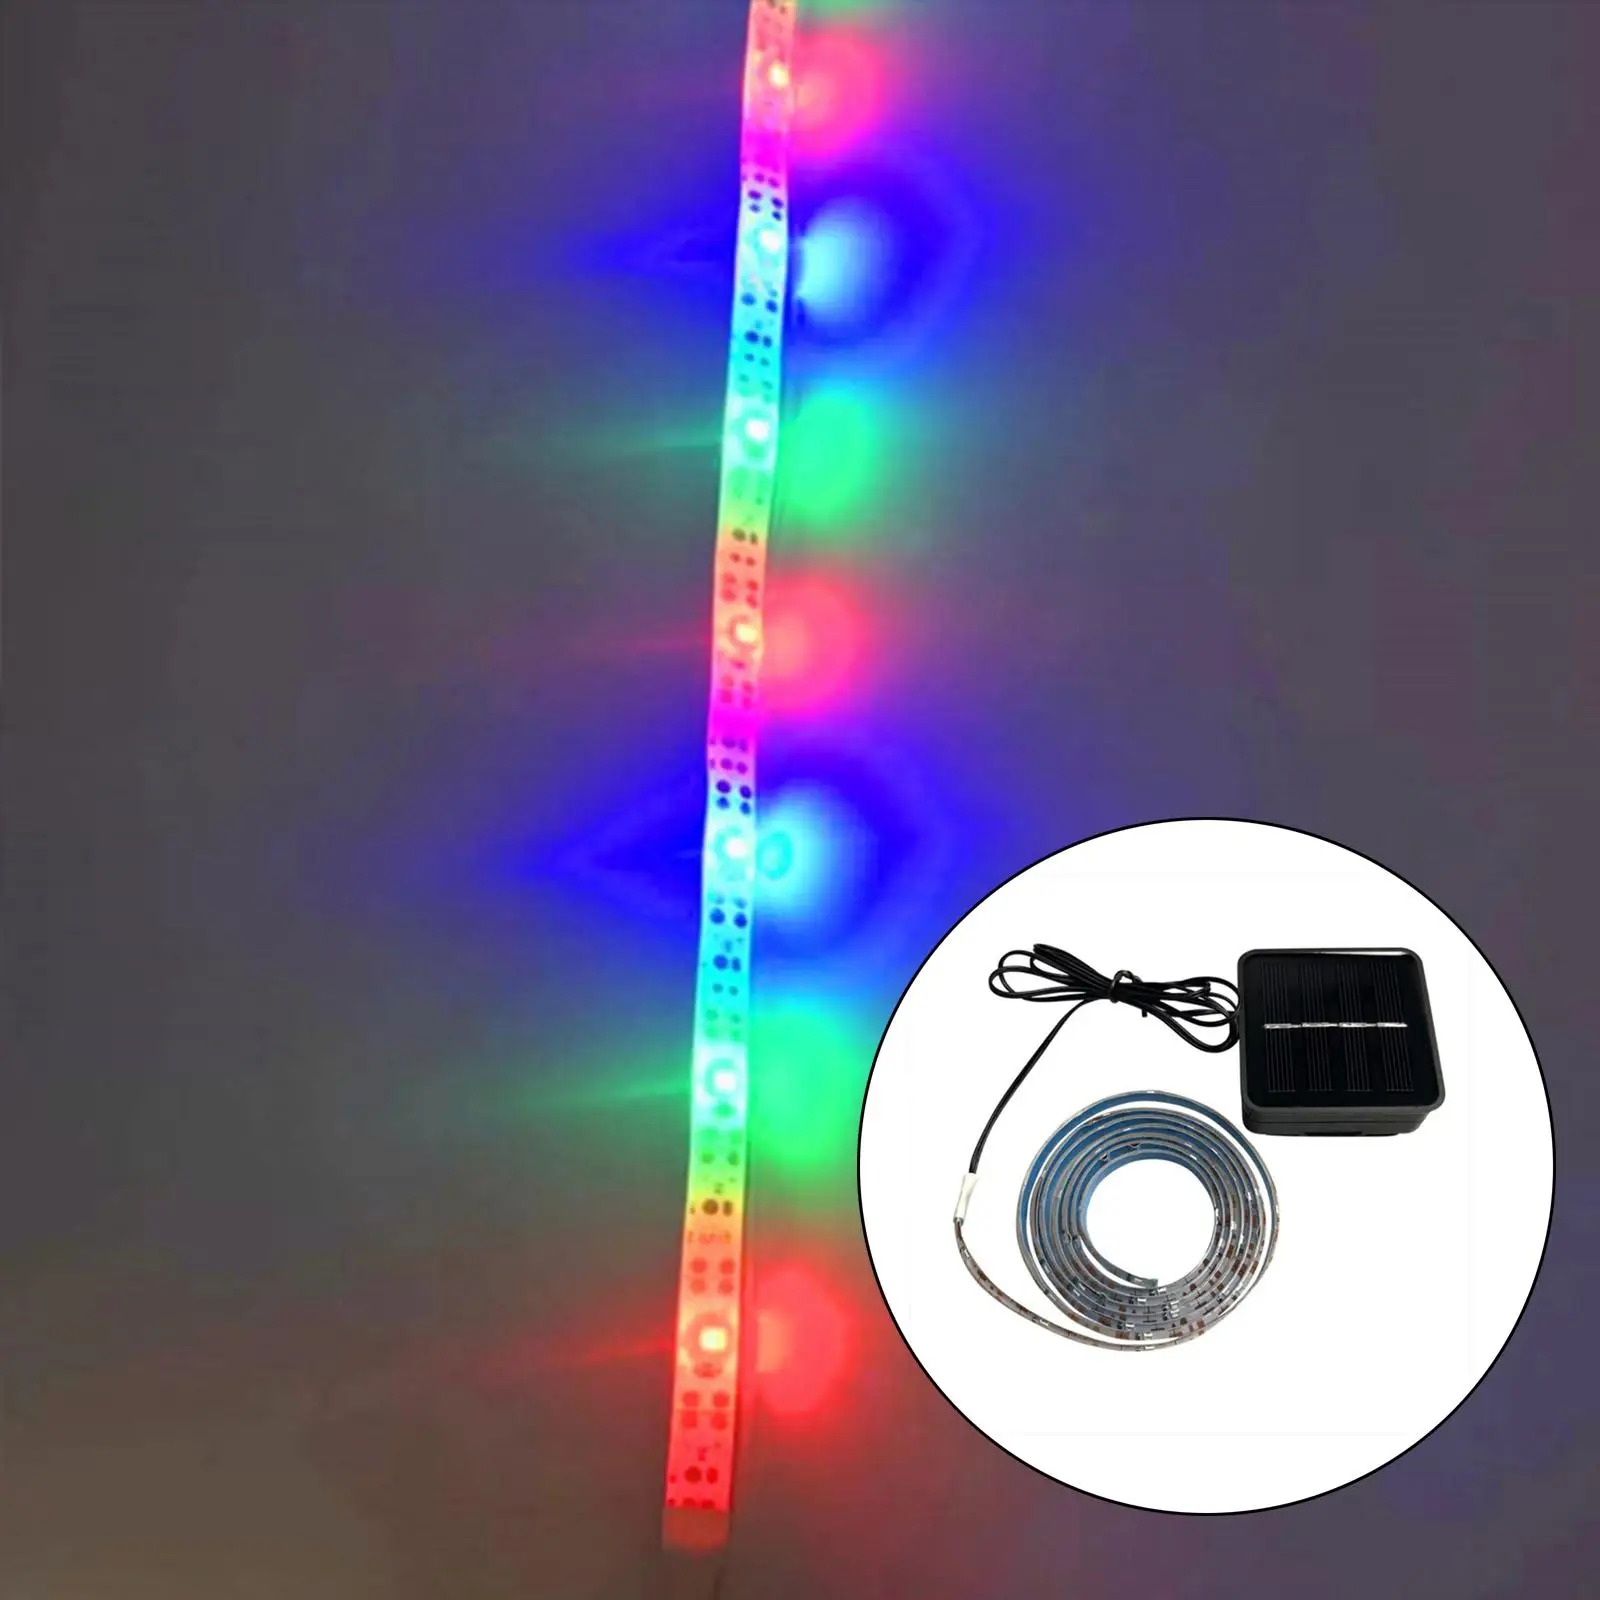 Solar Power LED Basketball Hoop Light Color-Changing Sensor Super Bright RGB LED Strip Lamp for Outdoors Sports Training Adults